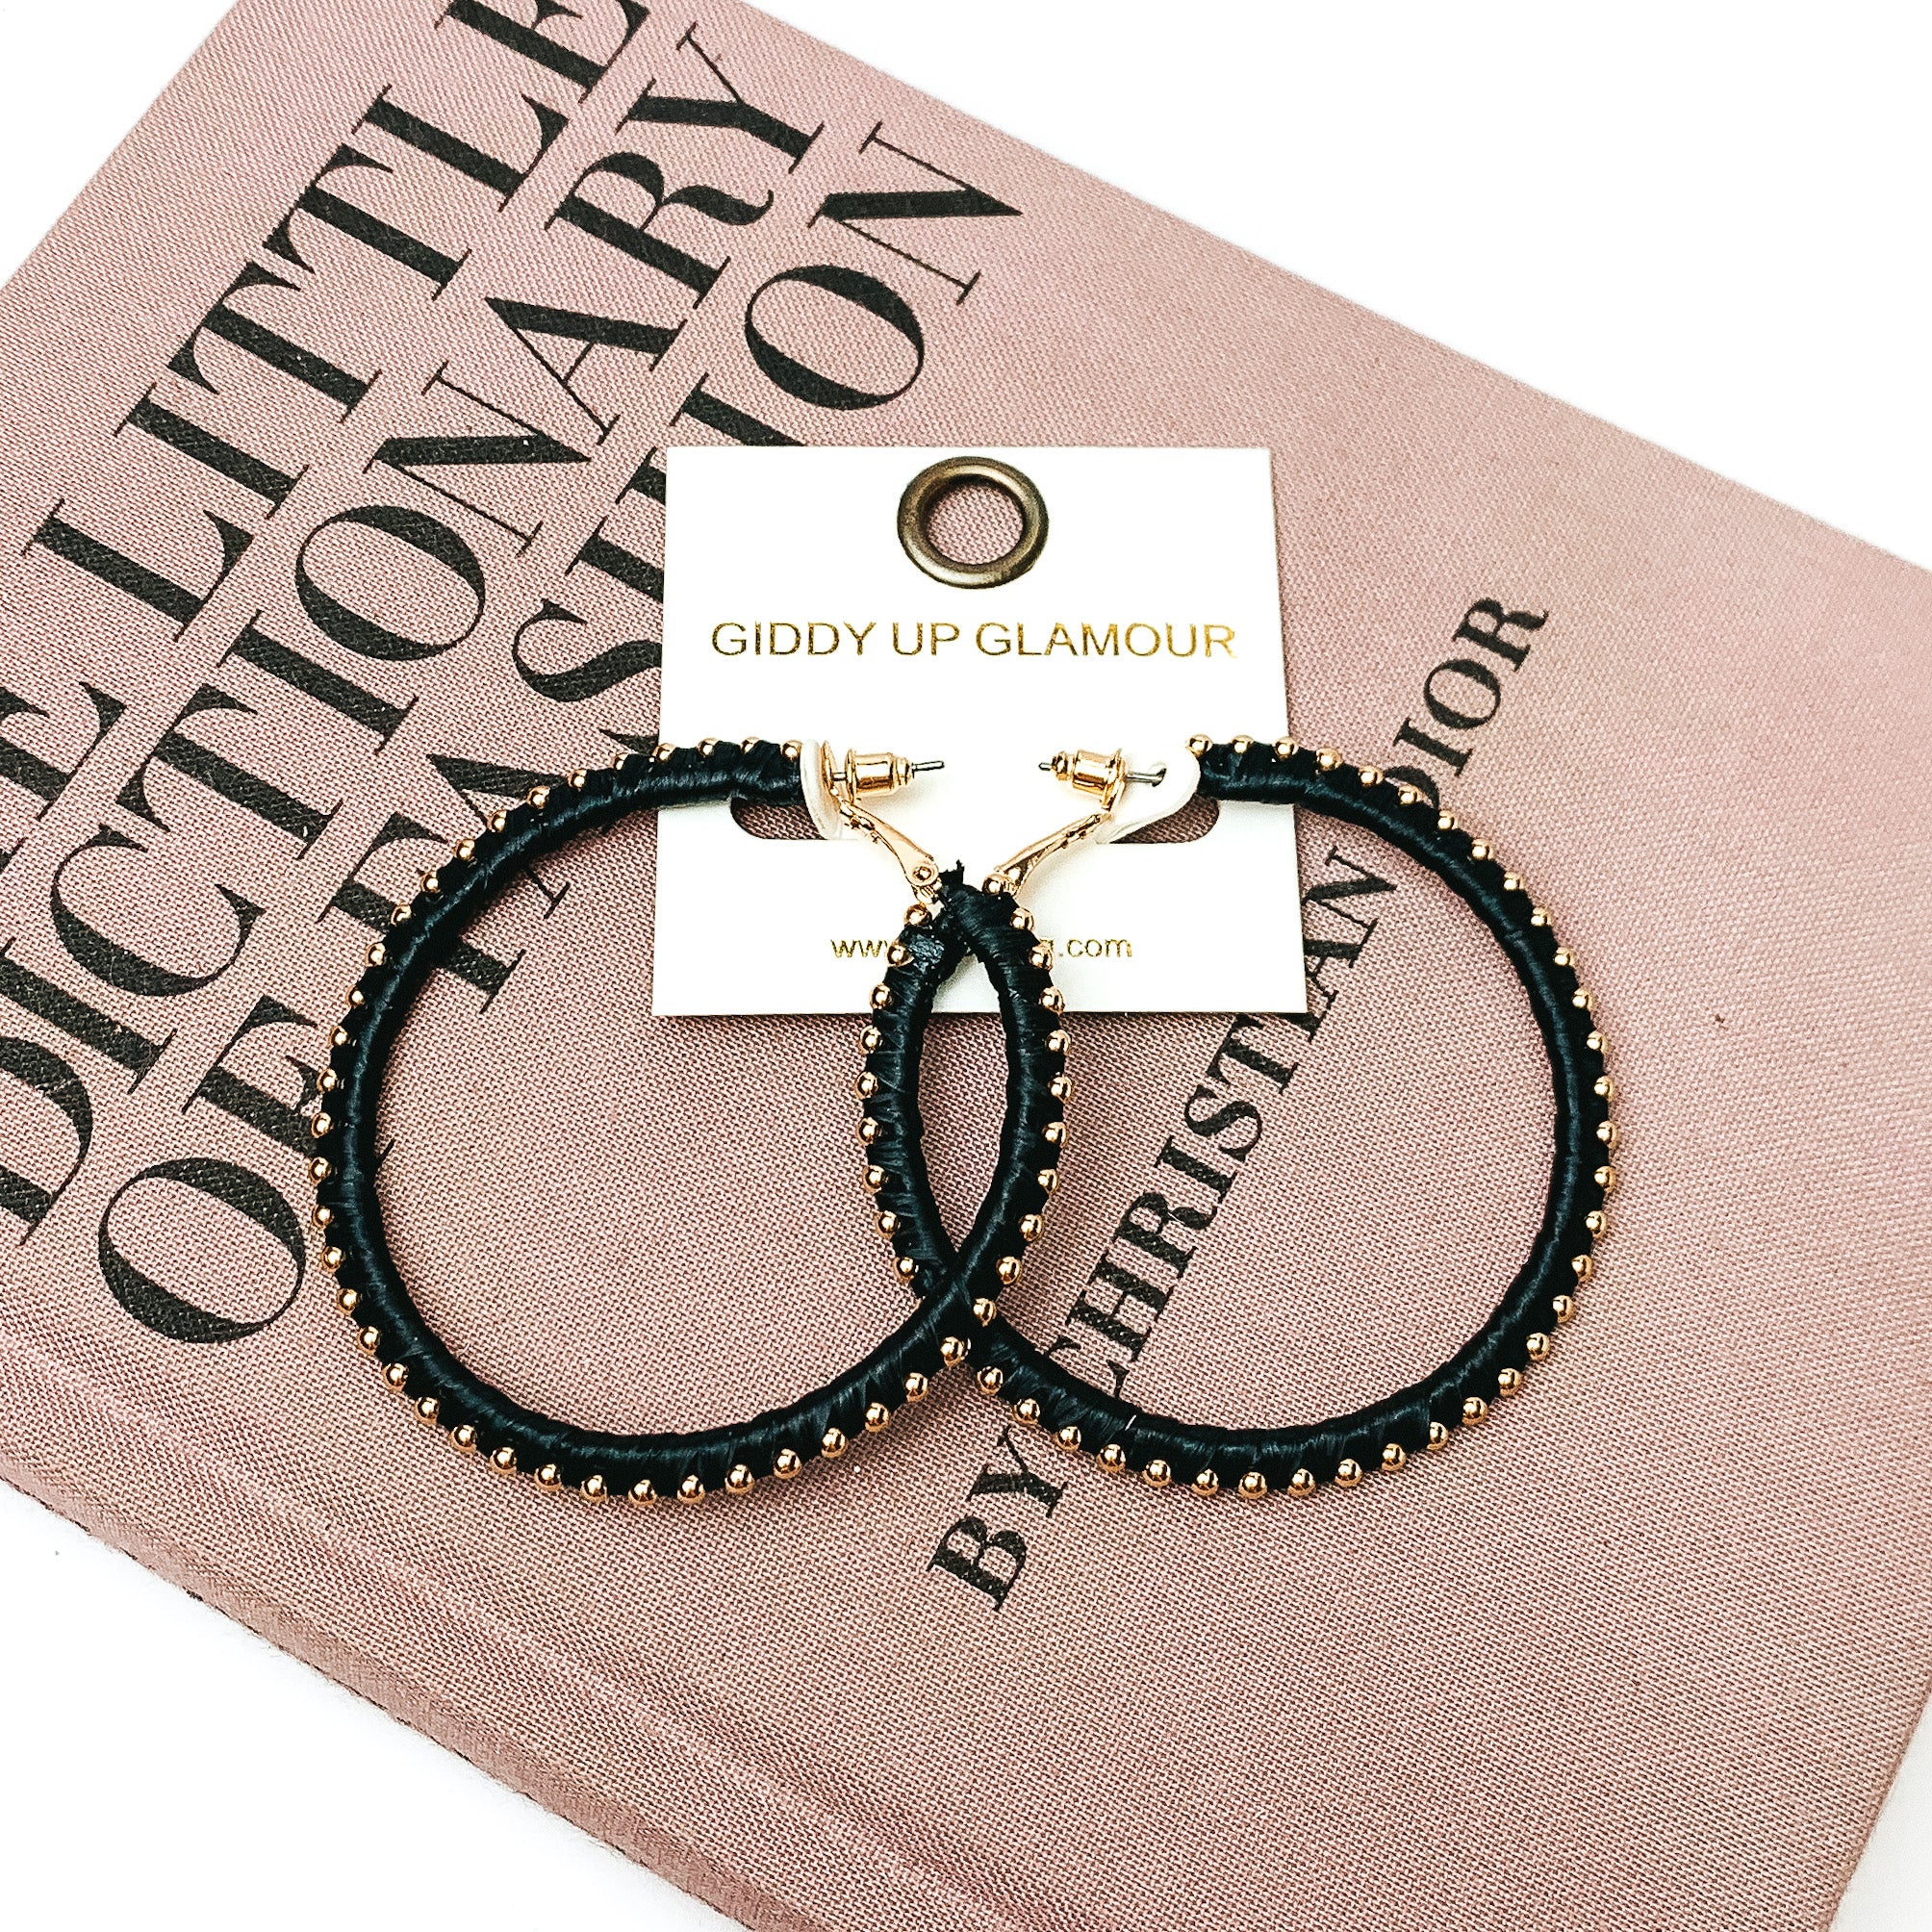  Pictured are circle black hoop earrings with gold beades around it. They are pictured with a pink fashion journal on a white background.